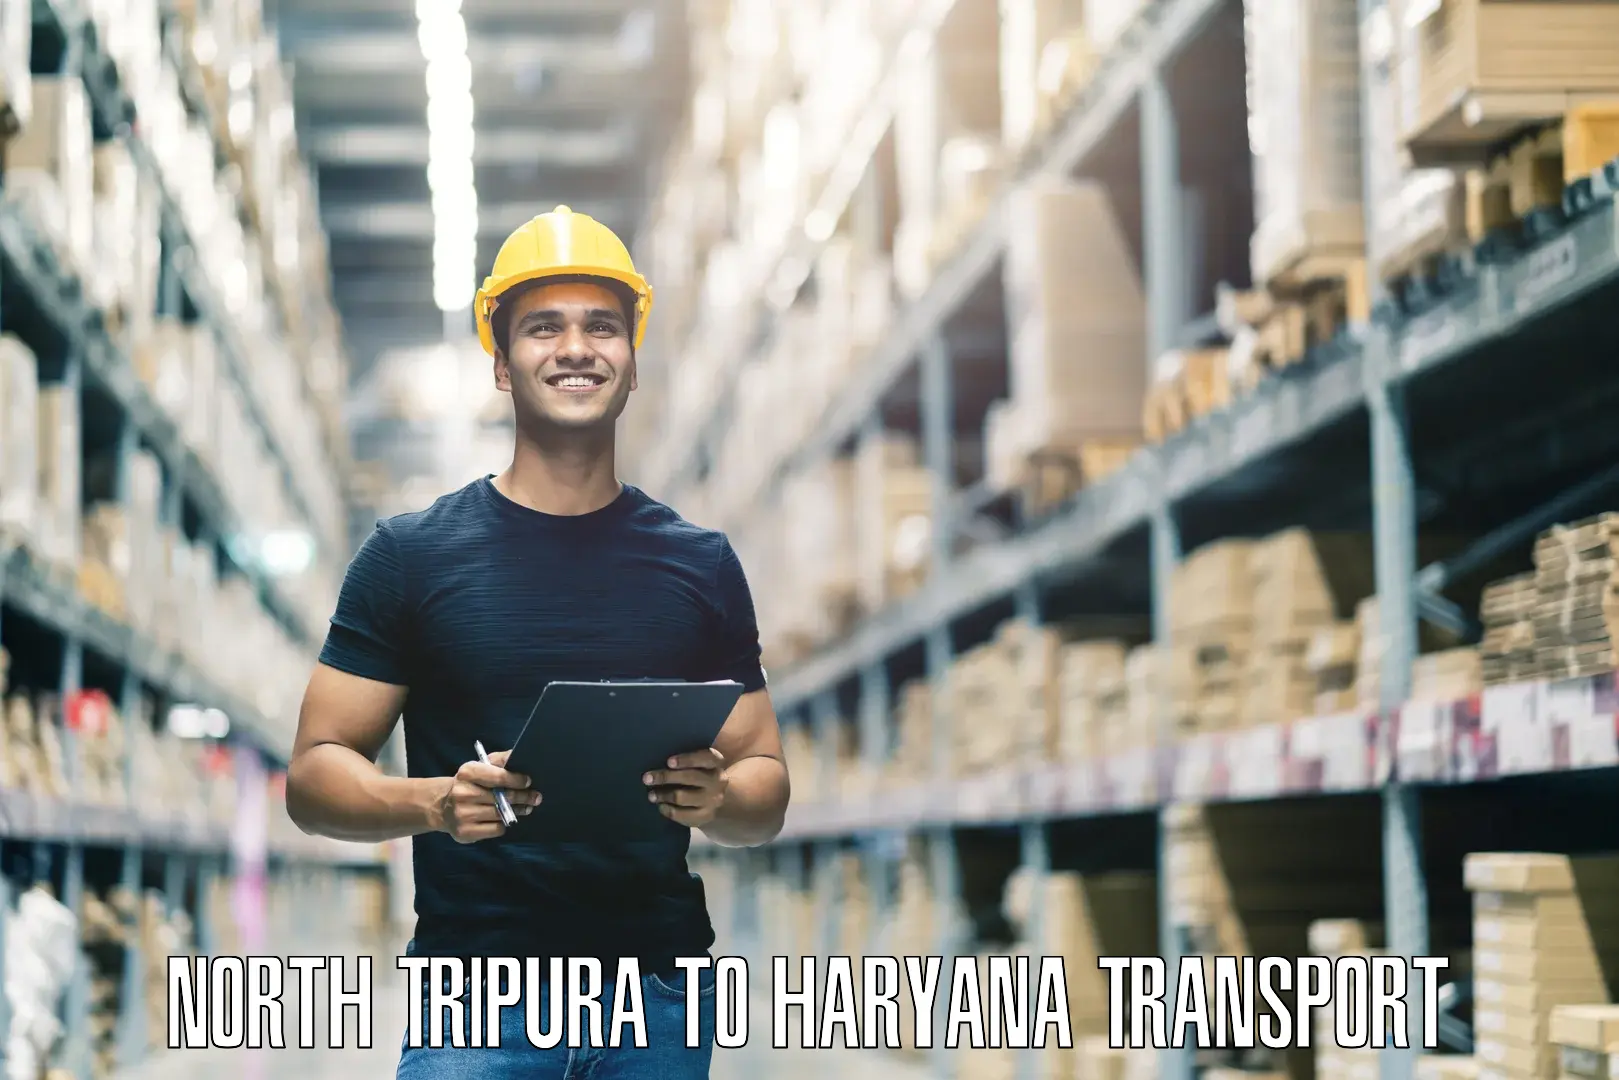 Express transport services in North Tripura to Gurgaon